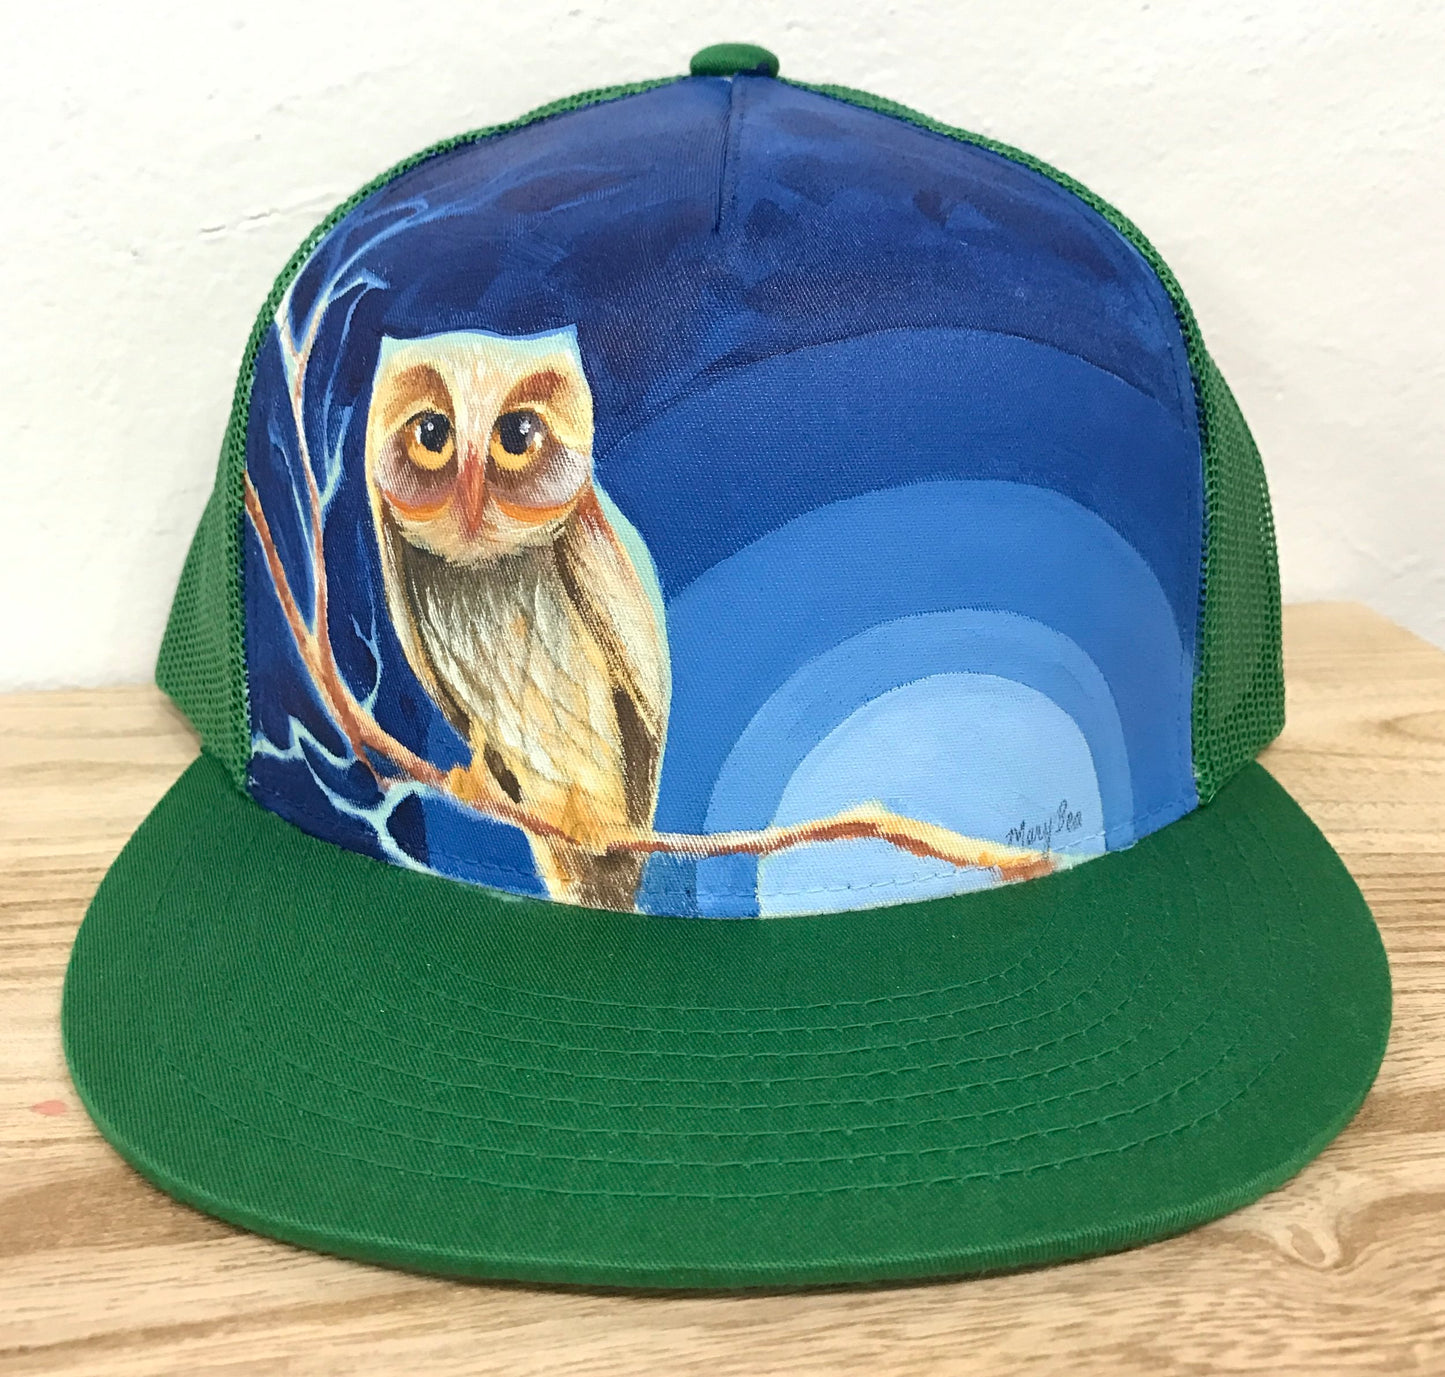 "Owl" Hand Painted on Green Snapback trucker Hat